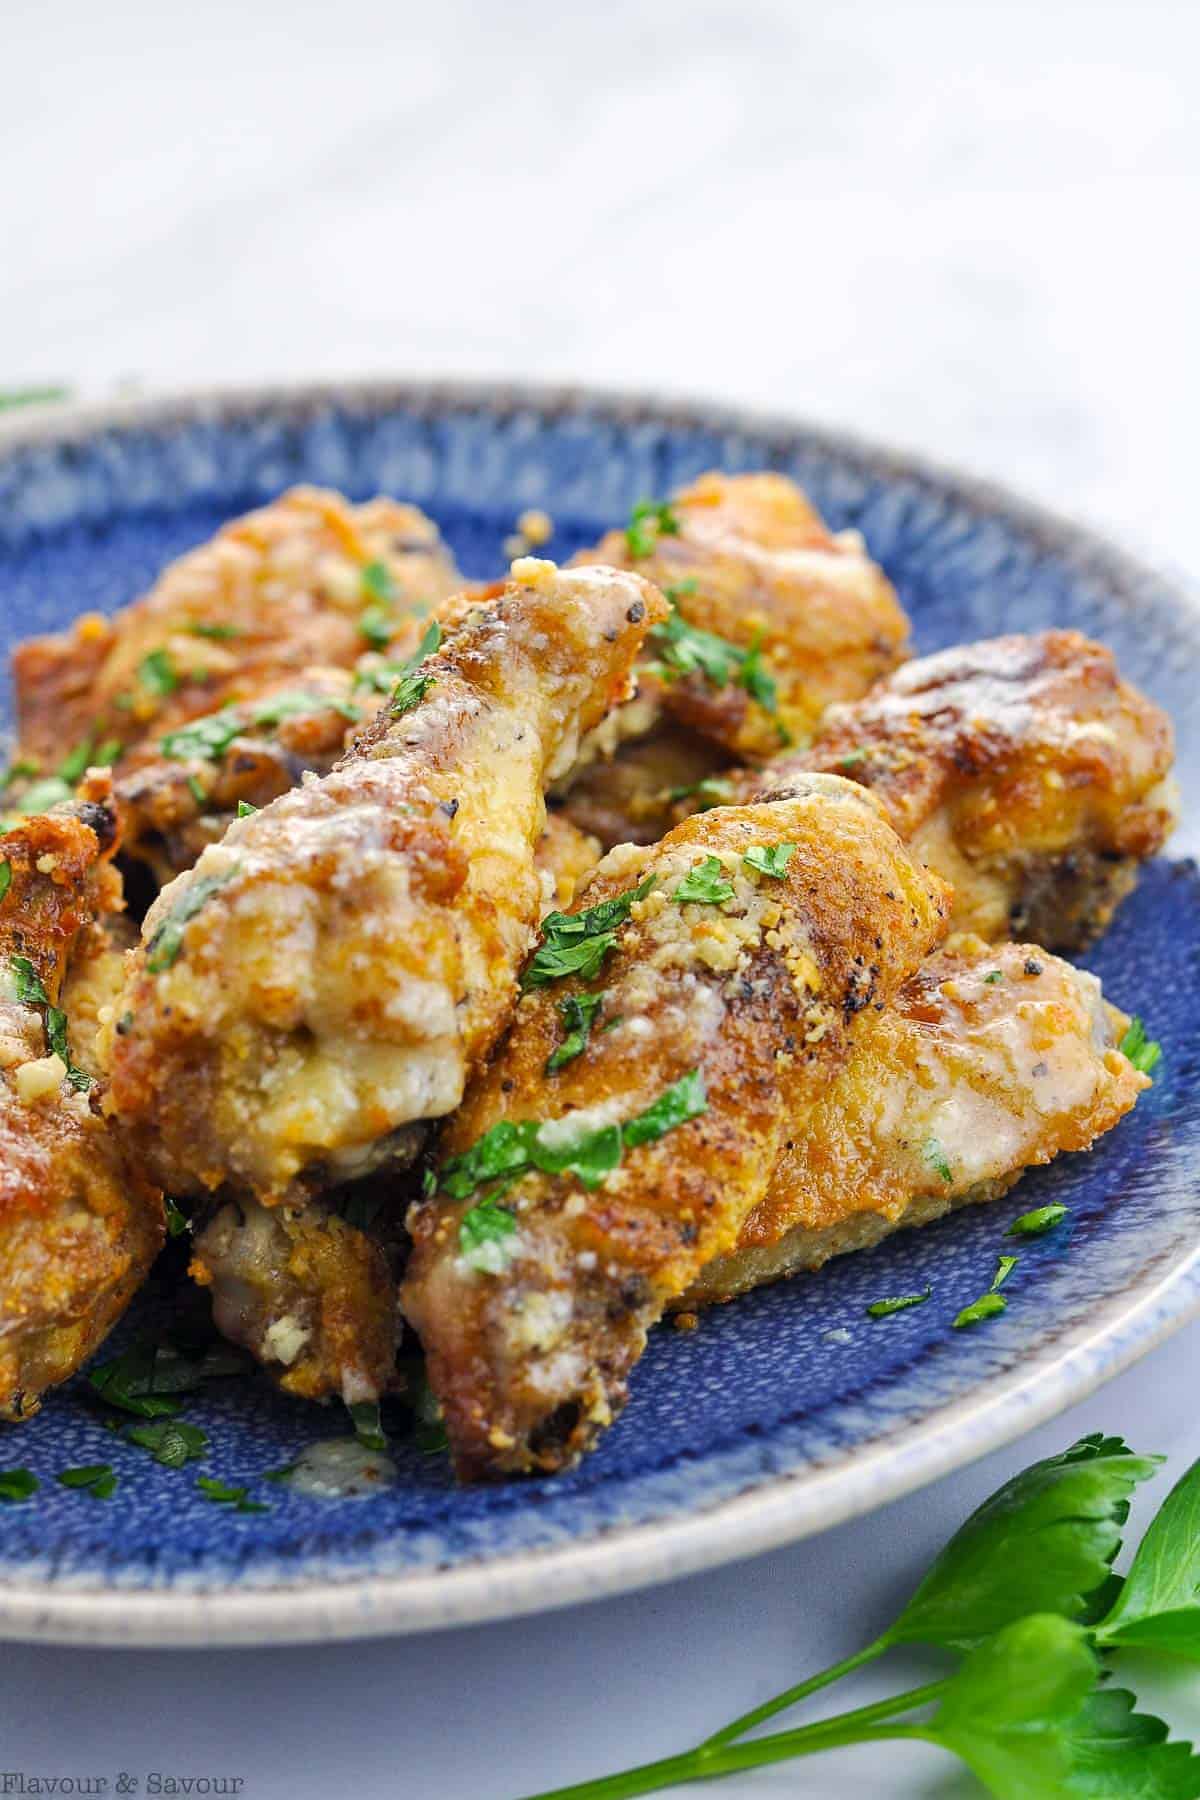 Close up view of Garlic Parmesan Air Fryer Wings sprinkled with fresh parsley on a blue plate